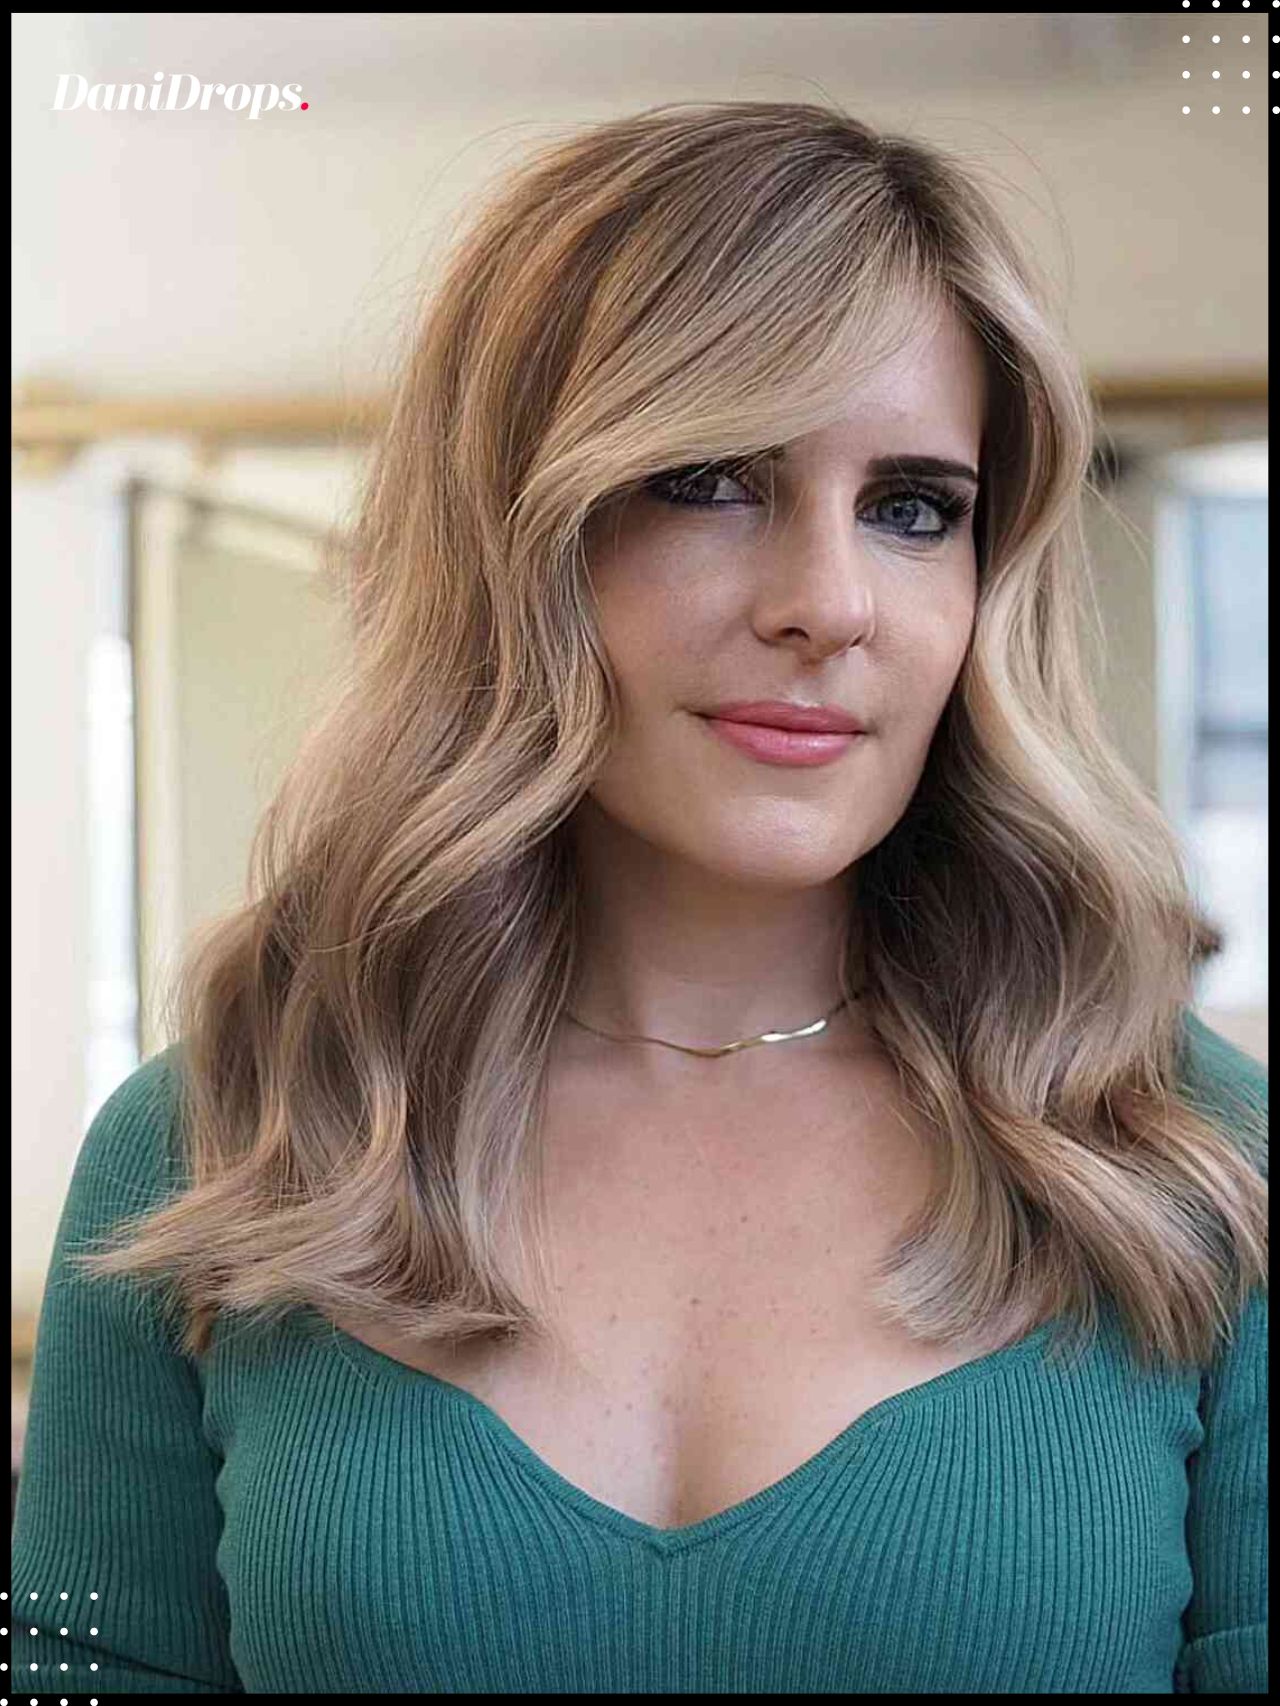 6 Cuts for a 40 Year Old Woman to Look 30